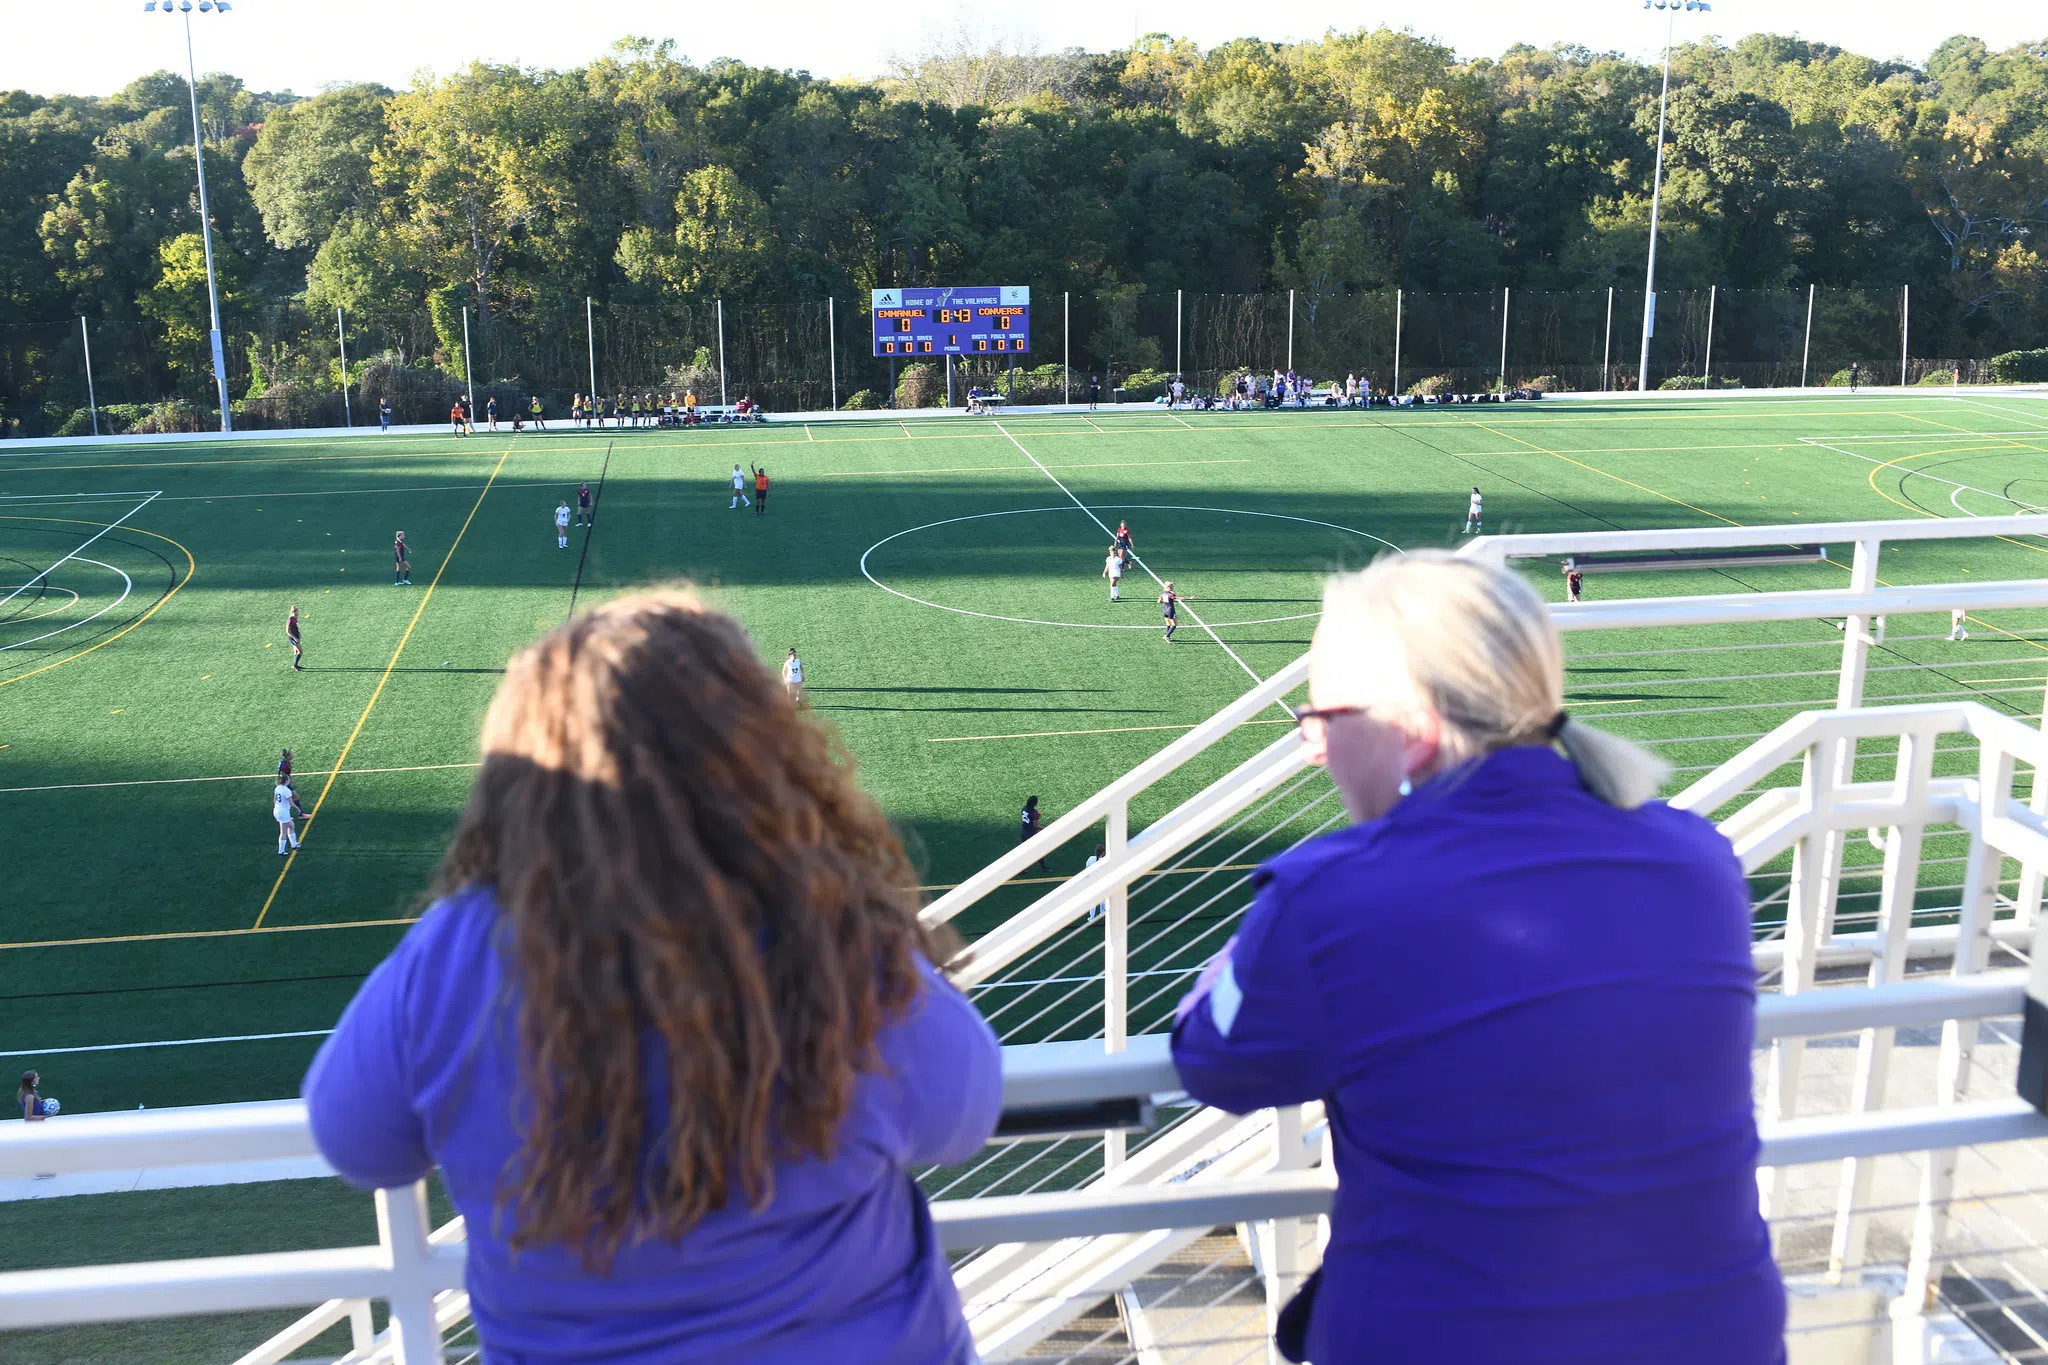 Two women with their backs to the camera survey a green athletic field below them. Distant students are scattered on the field mid-play.  